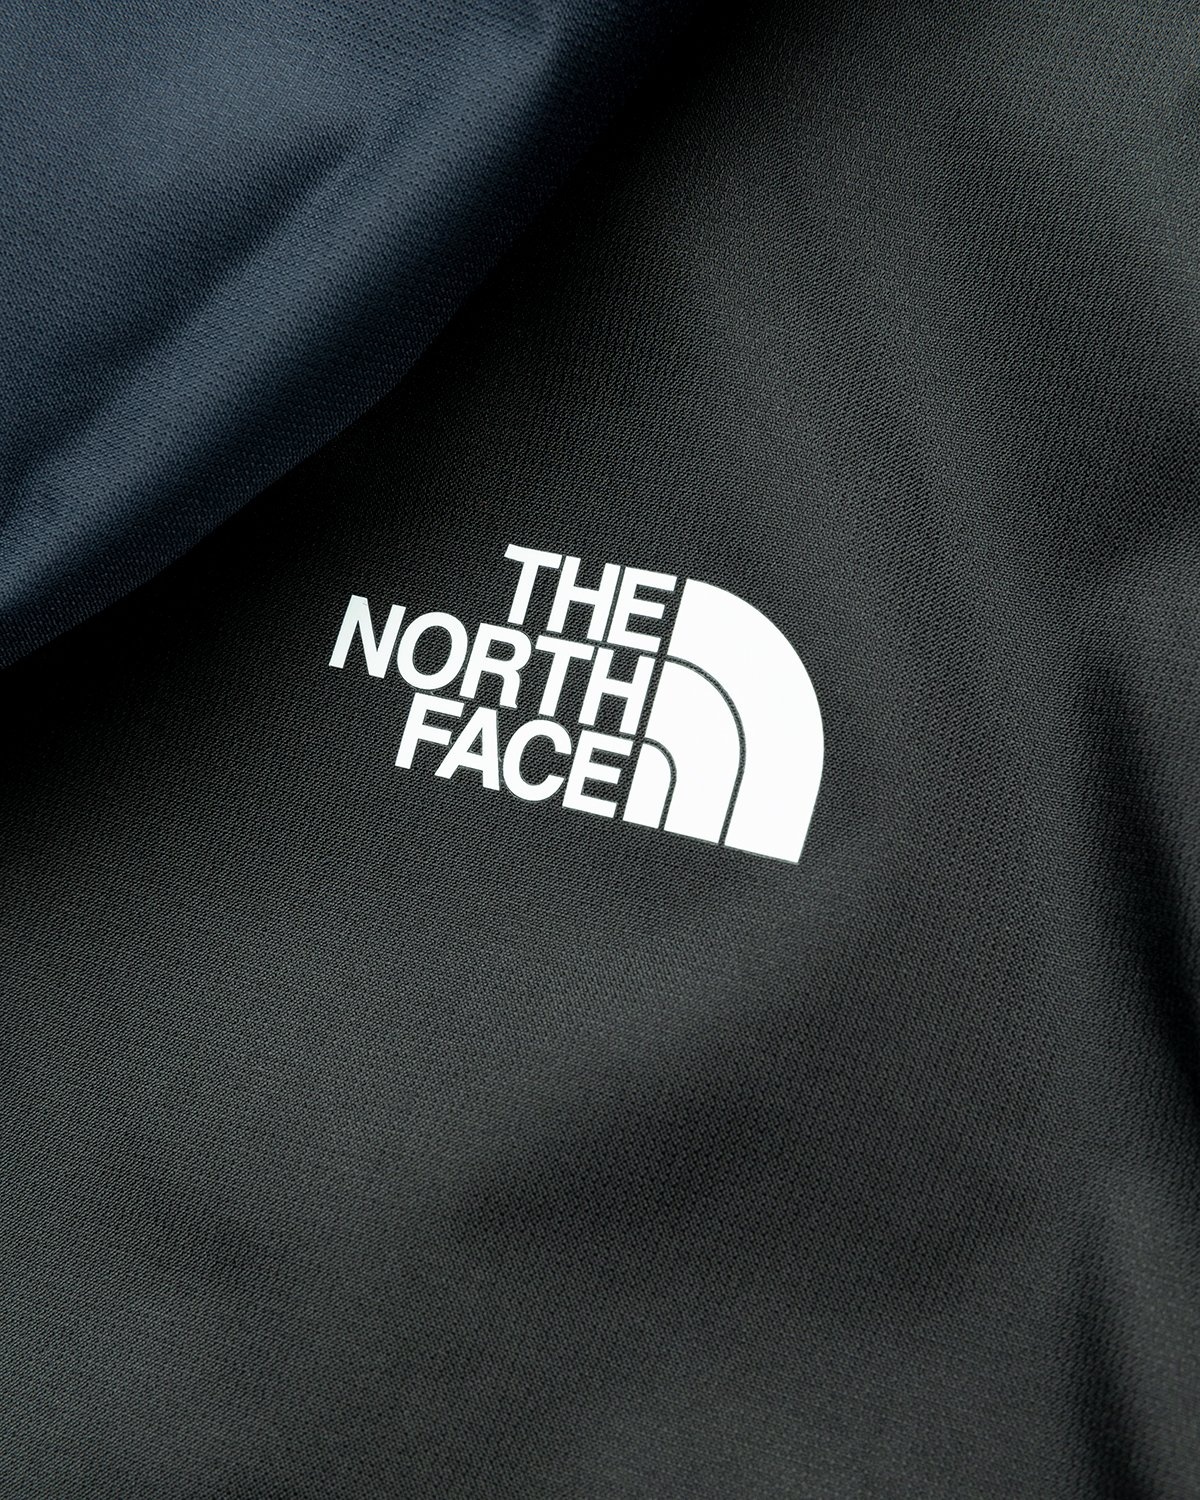 The North Face – Farside Jacket Aviator Navy - Outerwear - Blue - Image 6